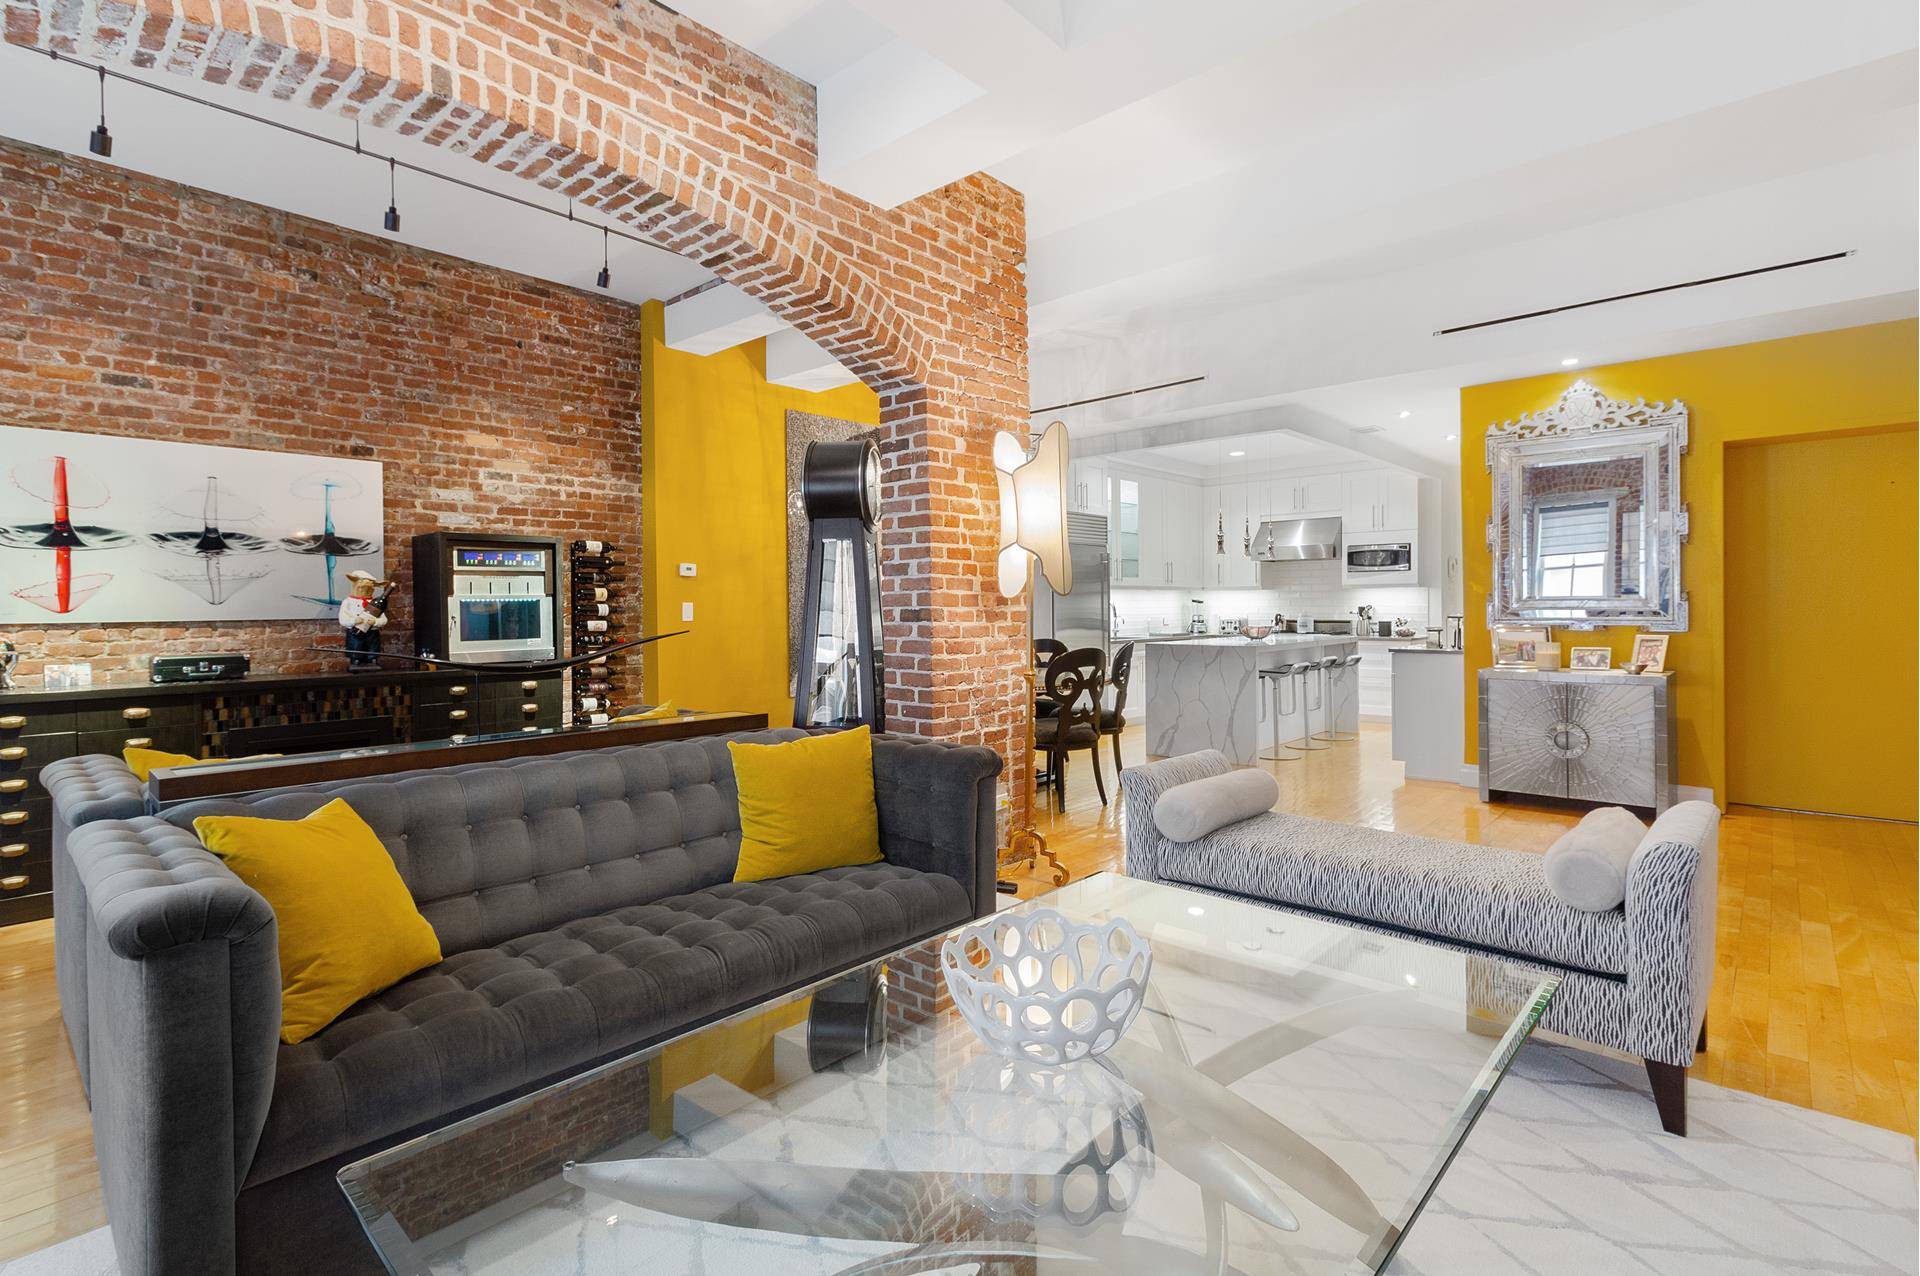 Rare, fully furnished short term rental October 1, 2023 May 1, 2024 in a quintessential TriBeCa loft.